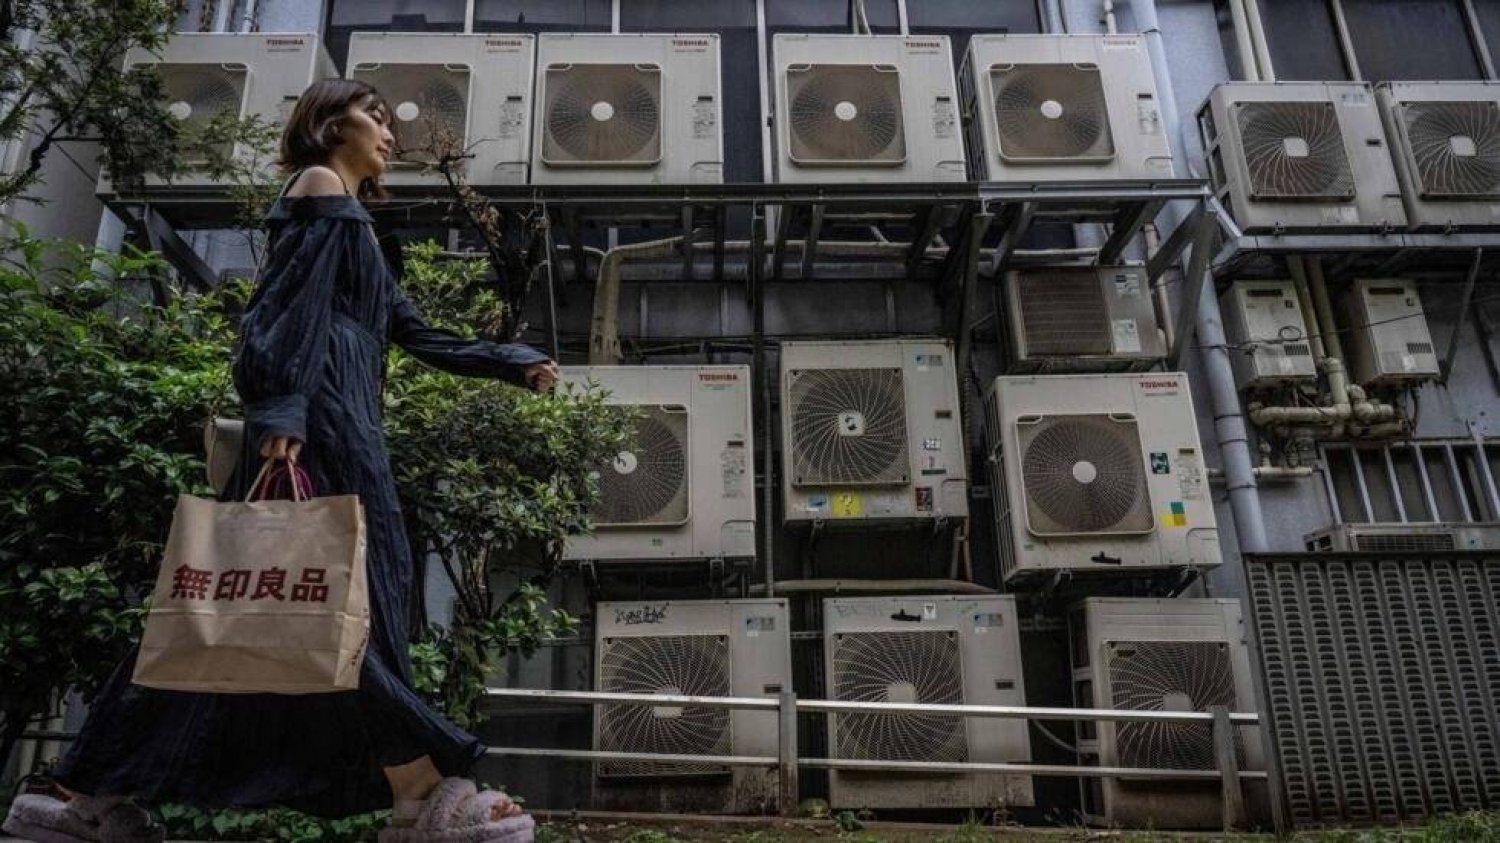 A record-breaking heatwave is broiling parts of Asia, helping drive surging demand for cooling options, including air-conditioning. Yuichi YAMAZAKI / AFP
